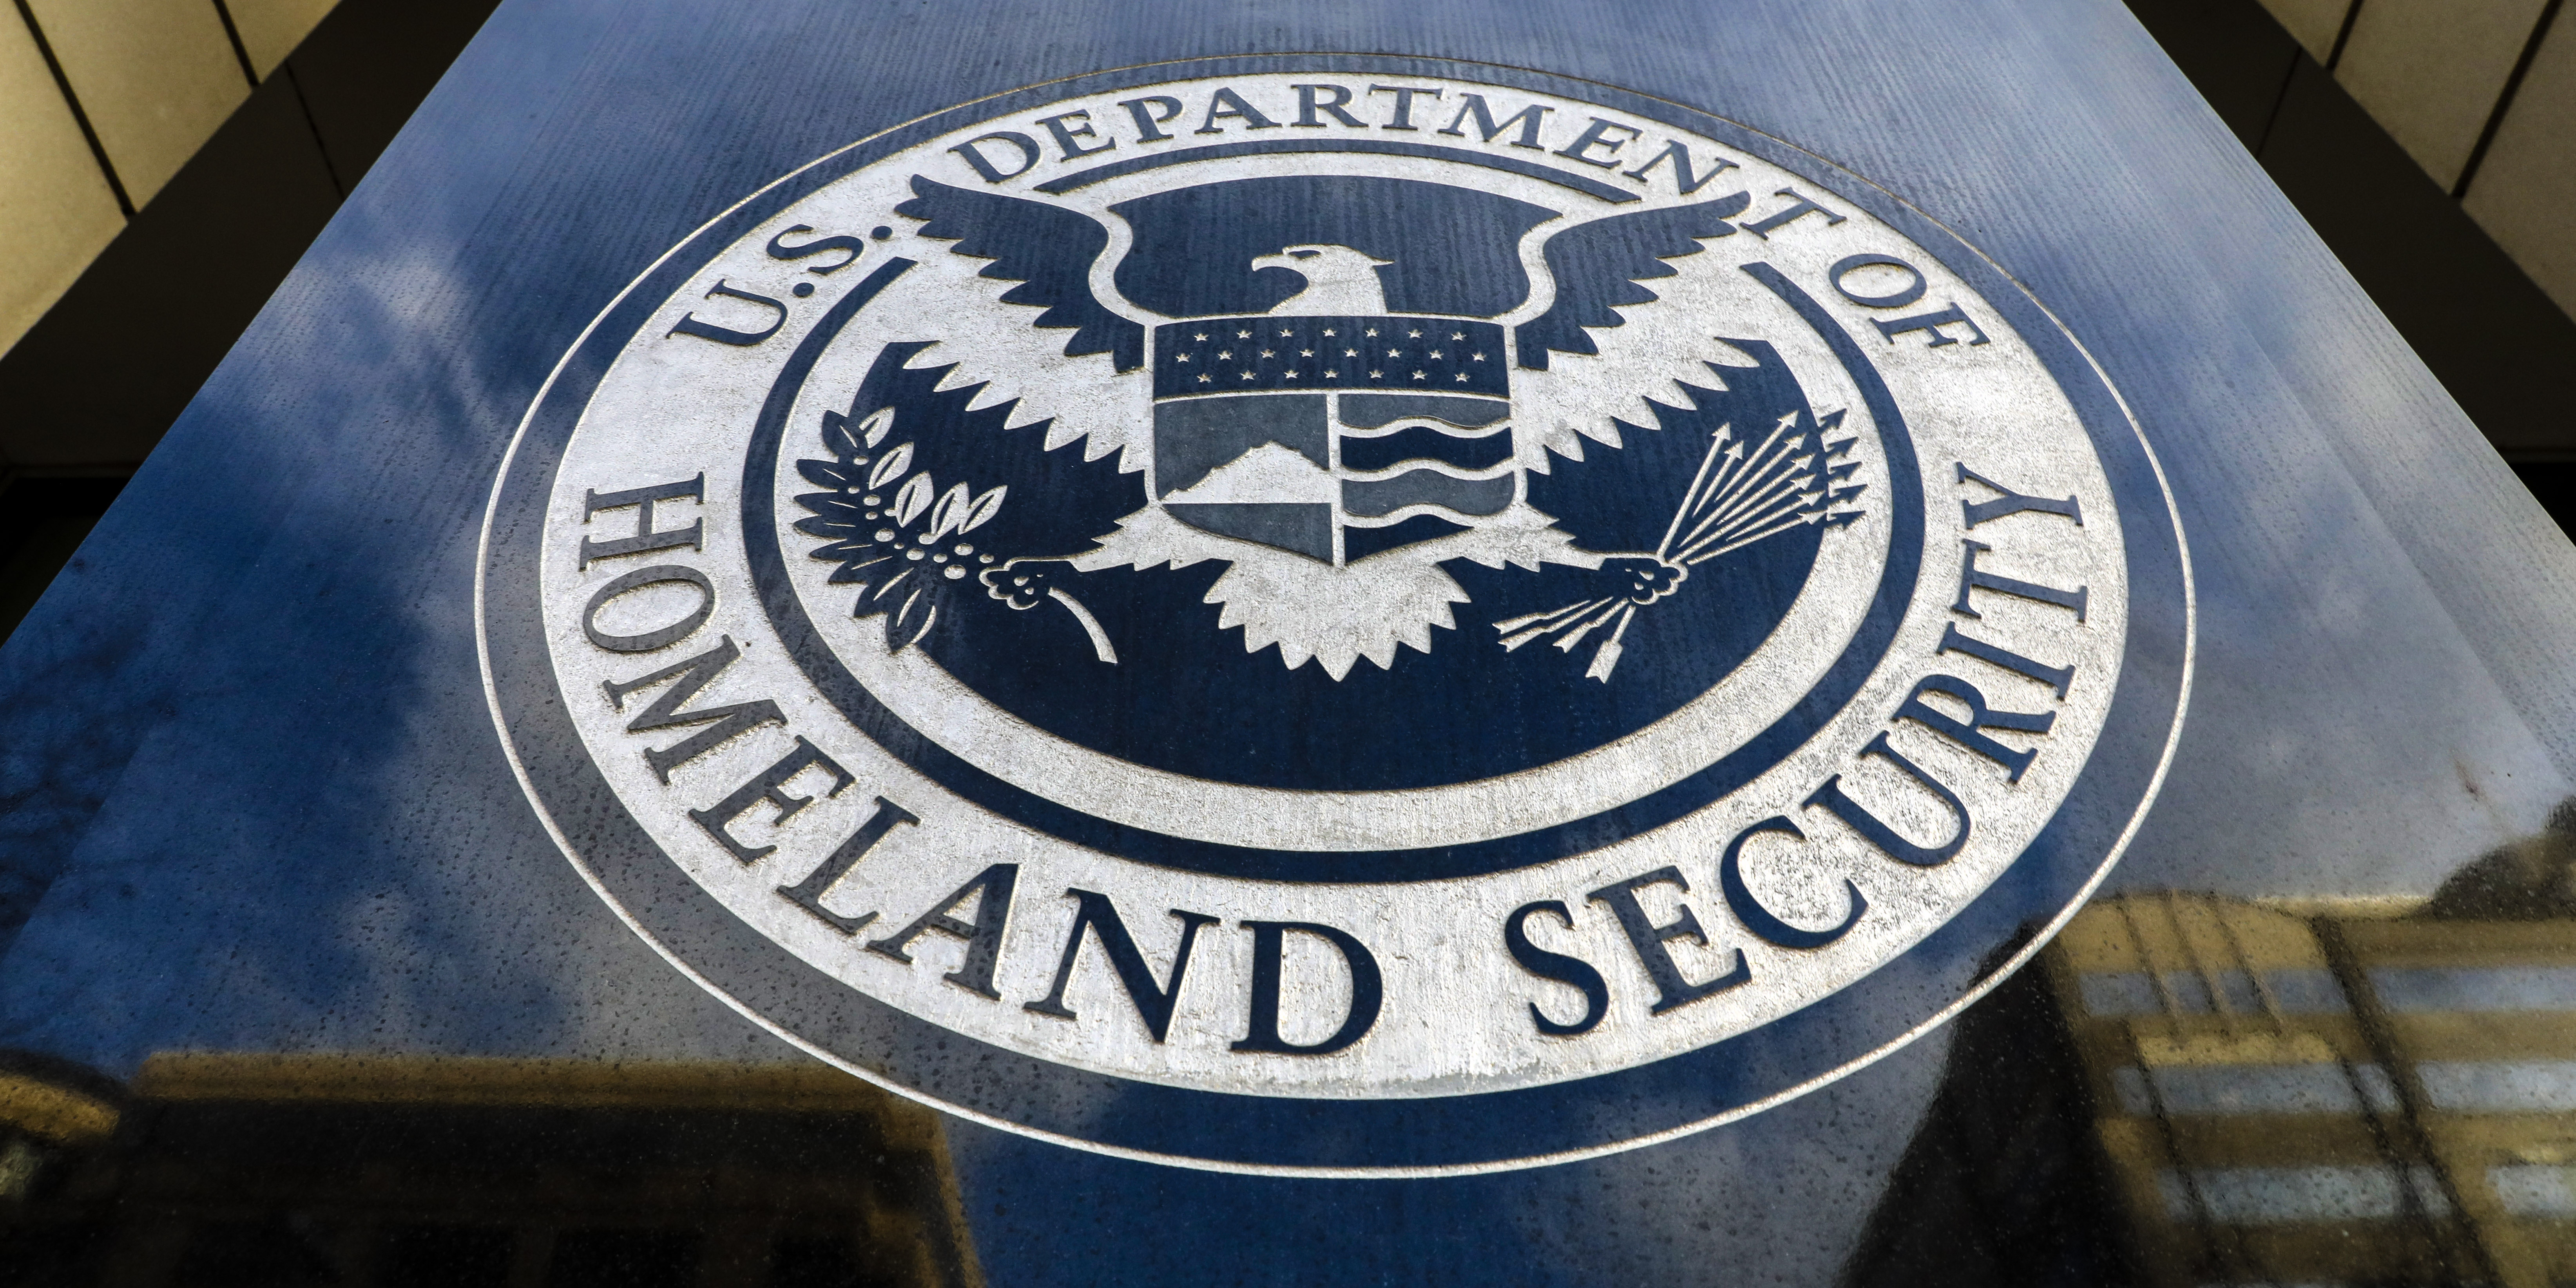 WASHINGTON D.C., UNITED STATES - JANUARY 5: The U.S. Department of Homeland Security sign is seen on US Immigration and Customs Enforcement (ICE) Building in Washington D.C., United States on January 5, 2023. The U.S. Immigration and Customs Enforcement is a federal law enforcement agency under the U.S. Department of Homeland Security. (Photo by Celal Gunes/Anadolu Agency via Getty Images)